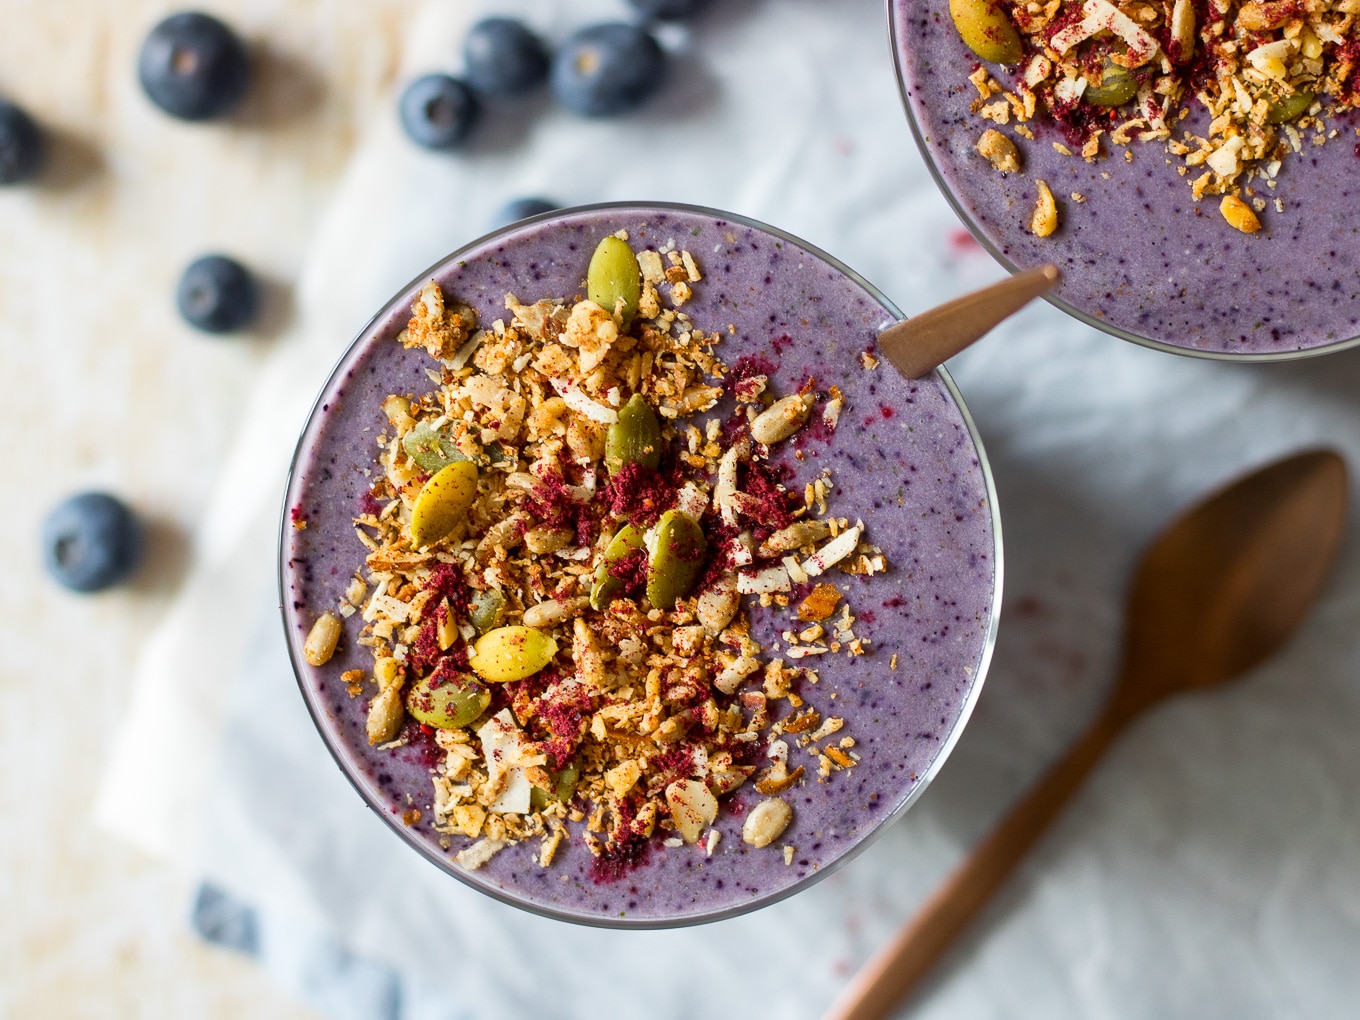 Easy Blueberry Zucchini Protein Smoothie made with frozen zucchini for a super thick creamy smoothie! Healthy, simple and delicious. Gluten free, paleo and with a vegan option.